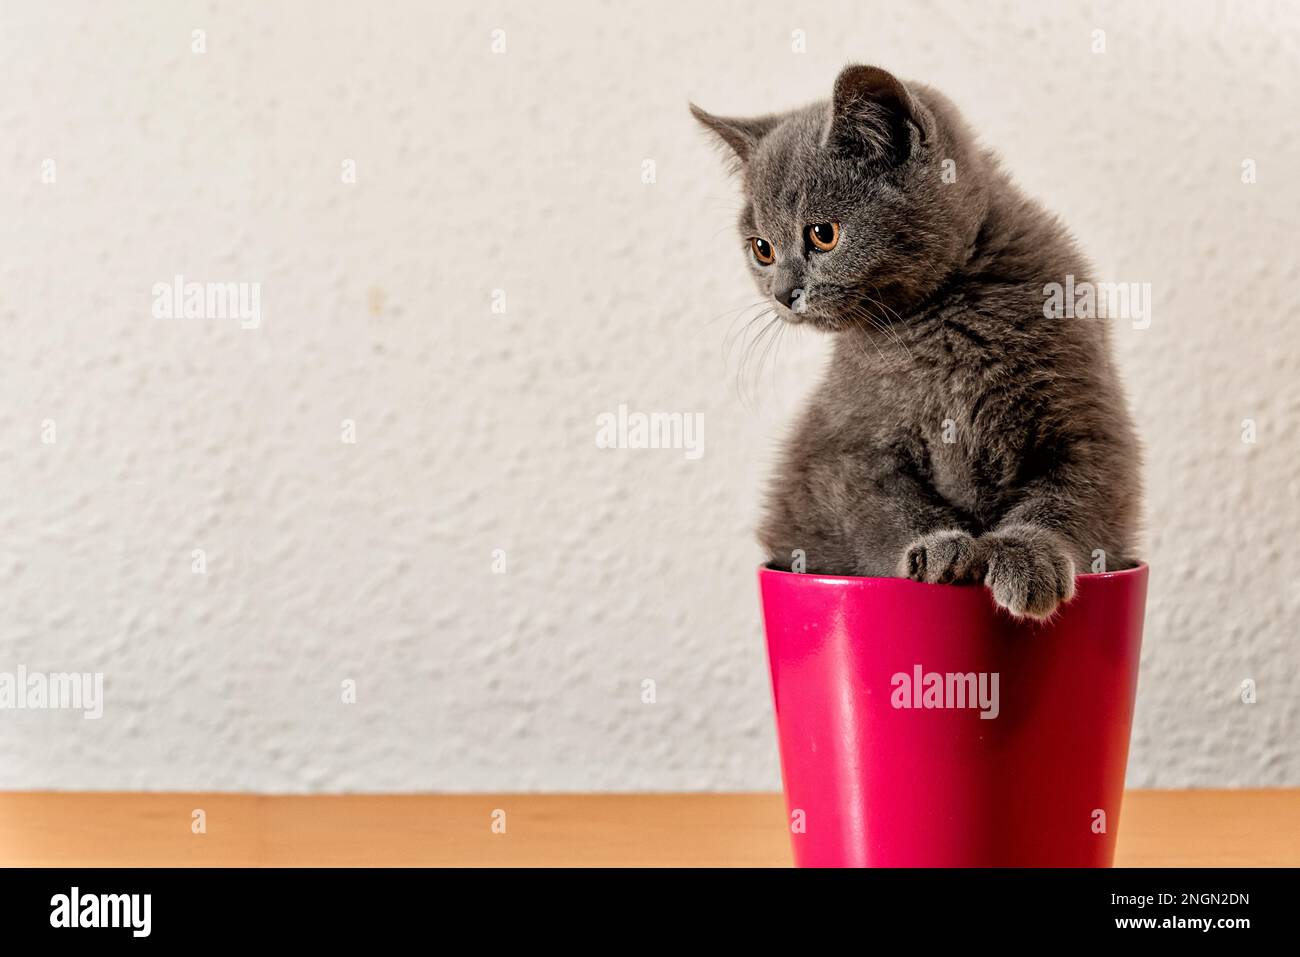 Kitten British shorthair gray inside a red container looking curiously, light background with copy space Stock Photo